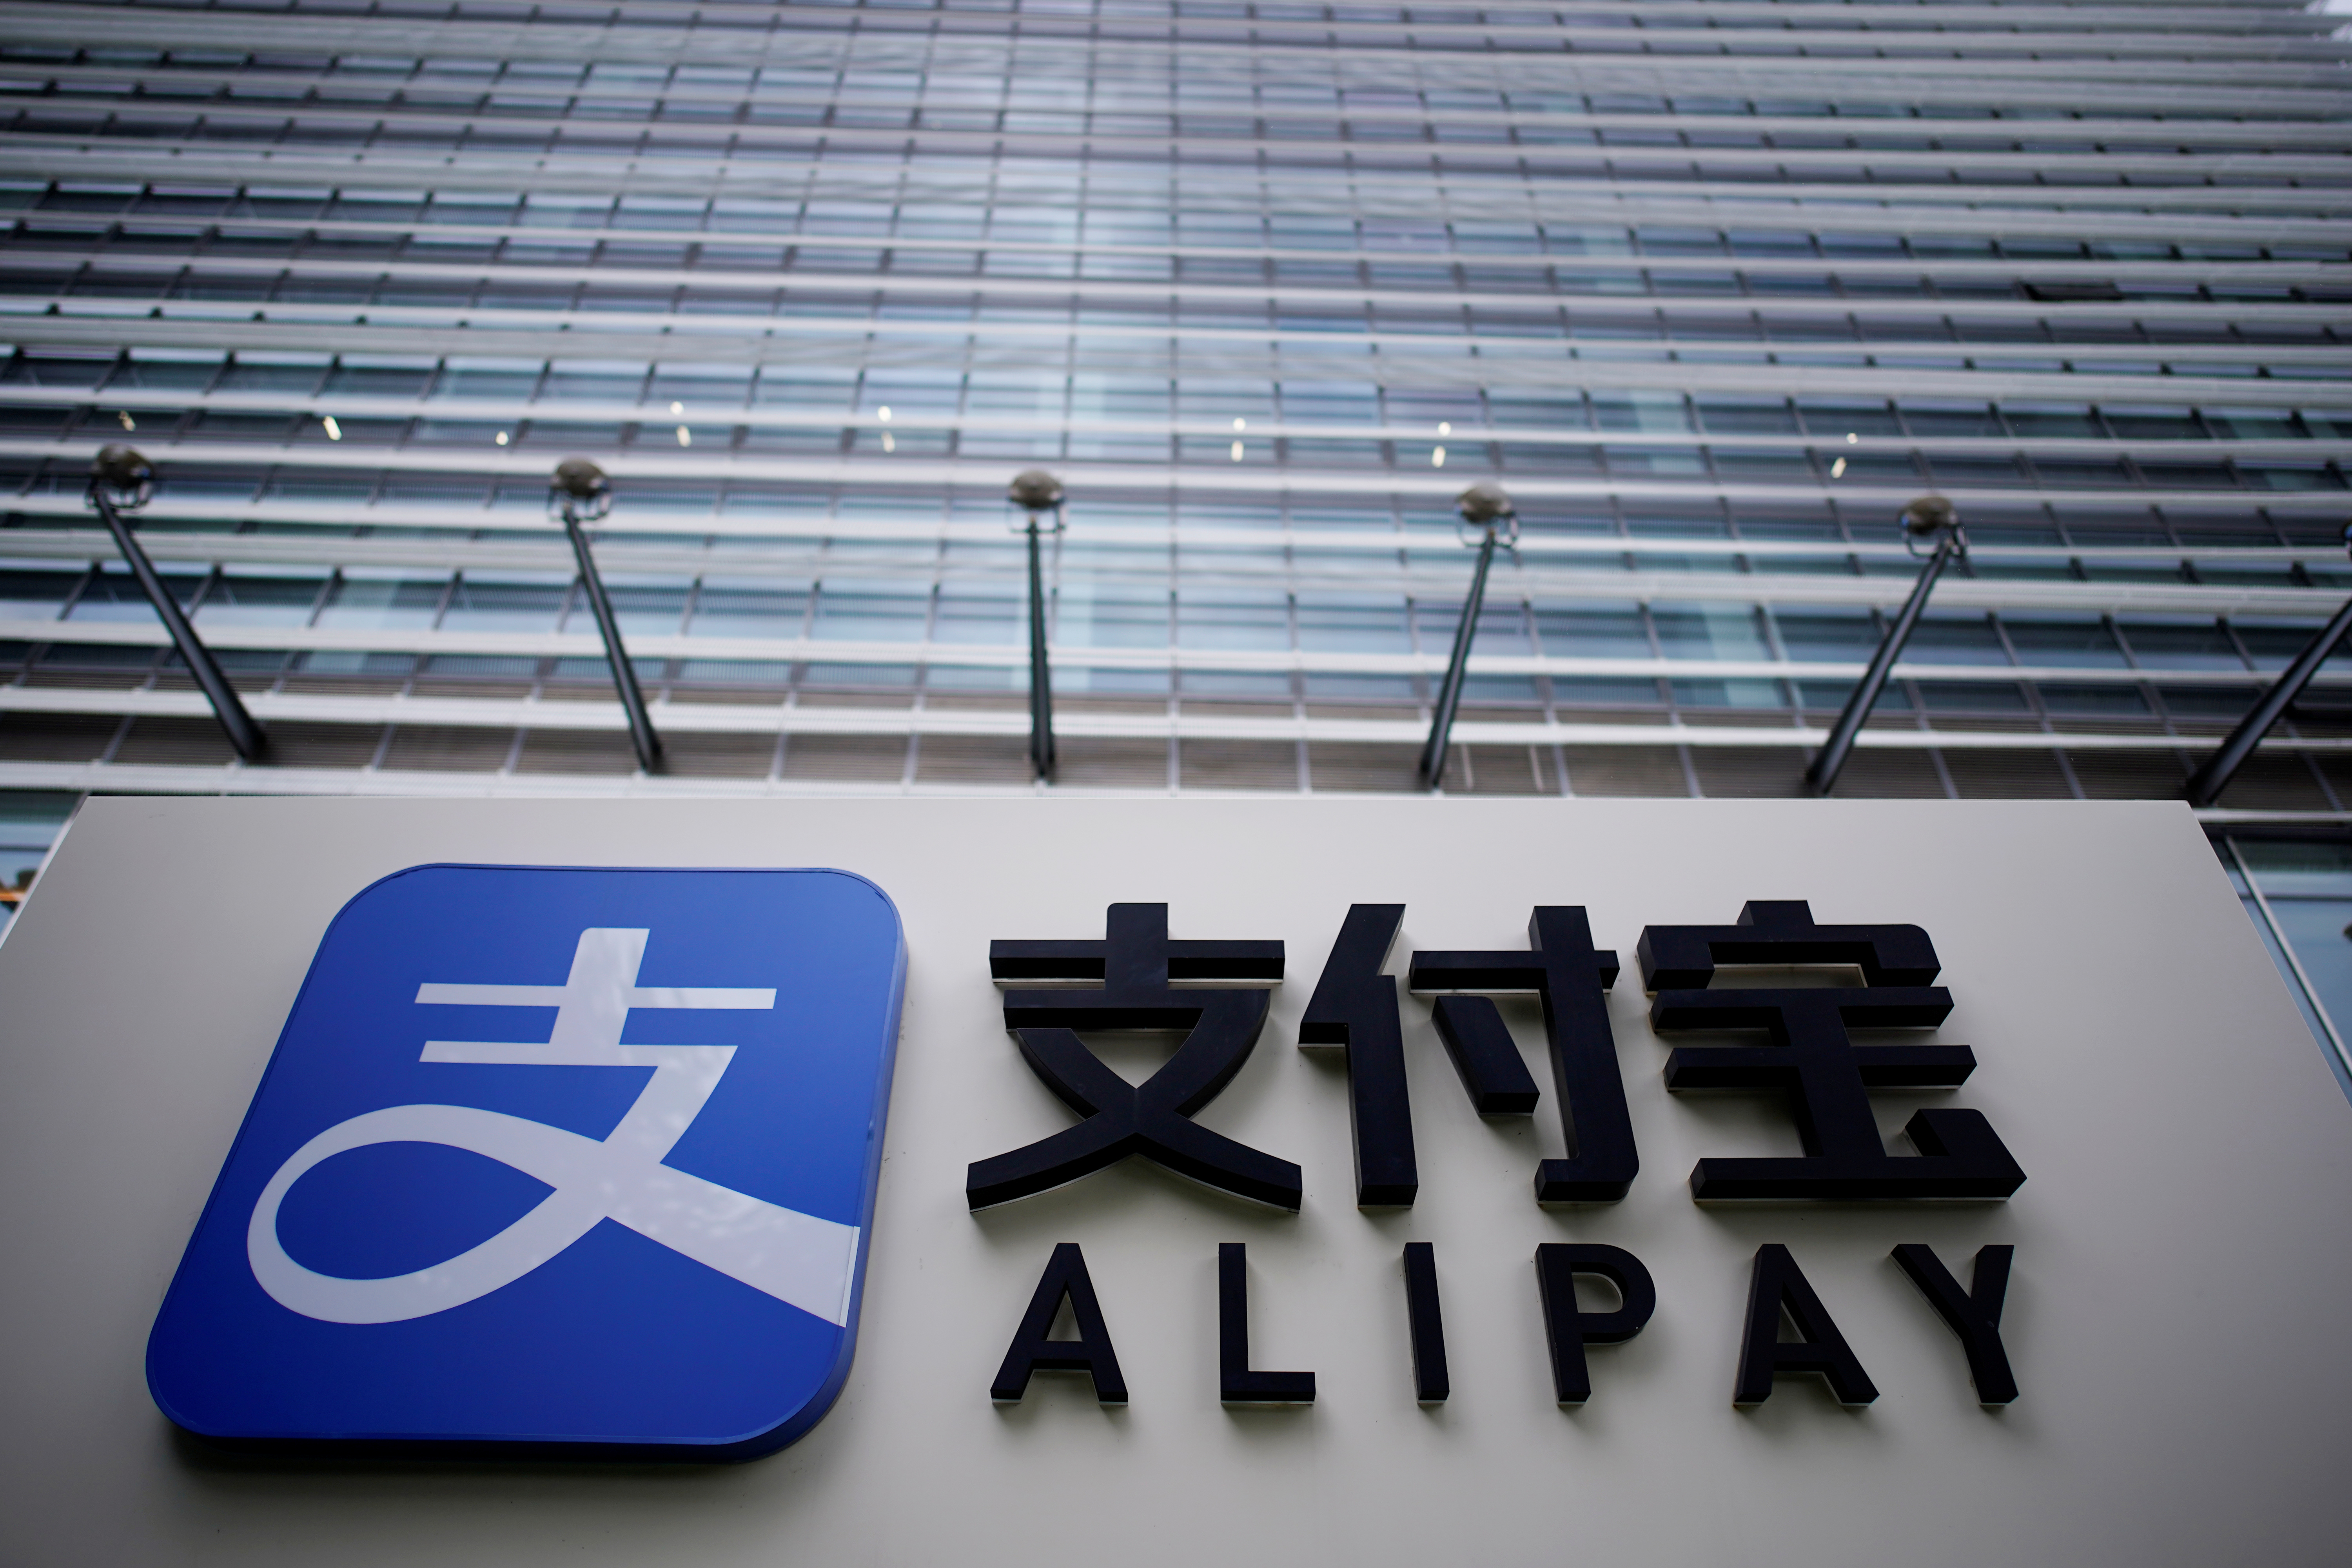 Chinese regulators probing Ant IPO over ‘conflict of interest’